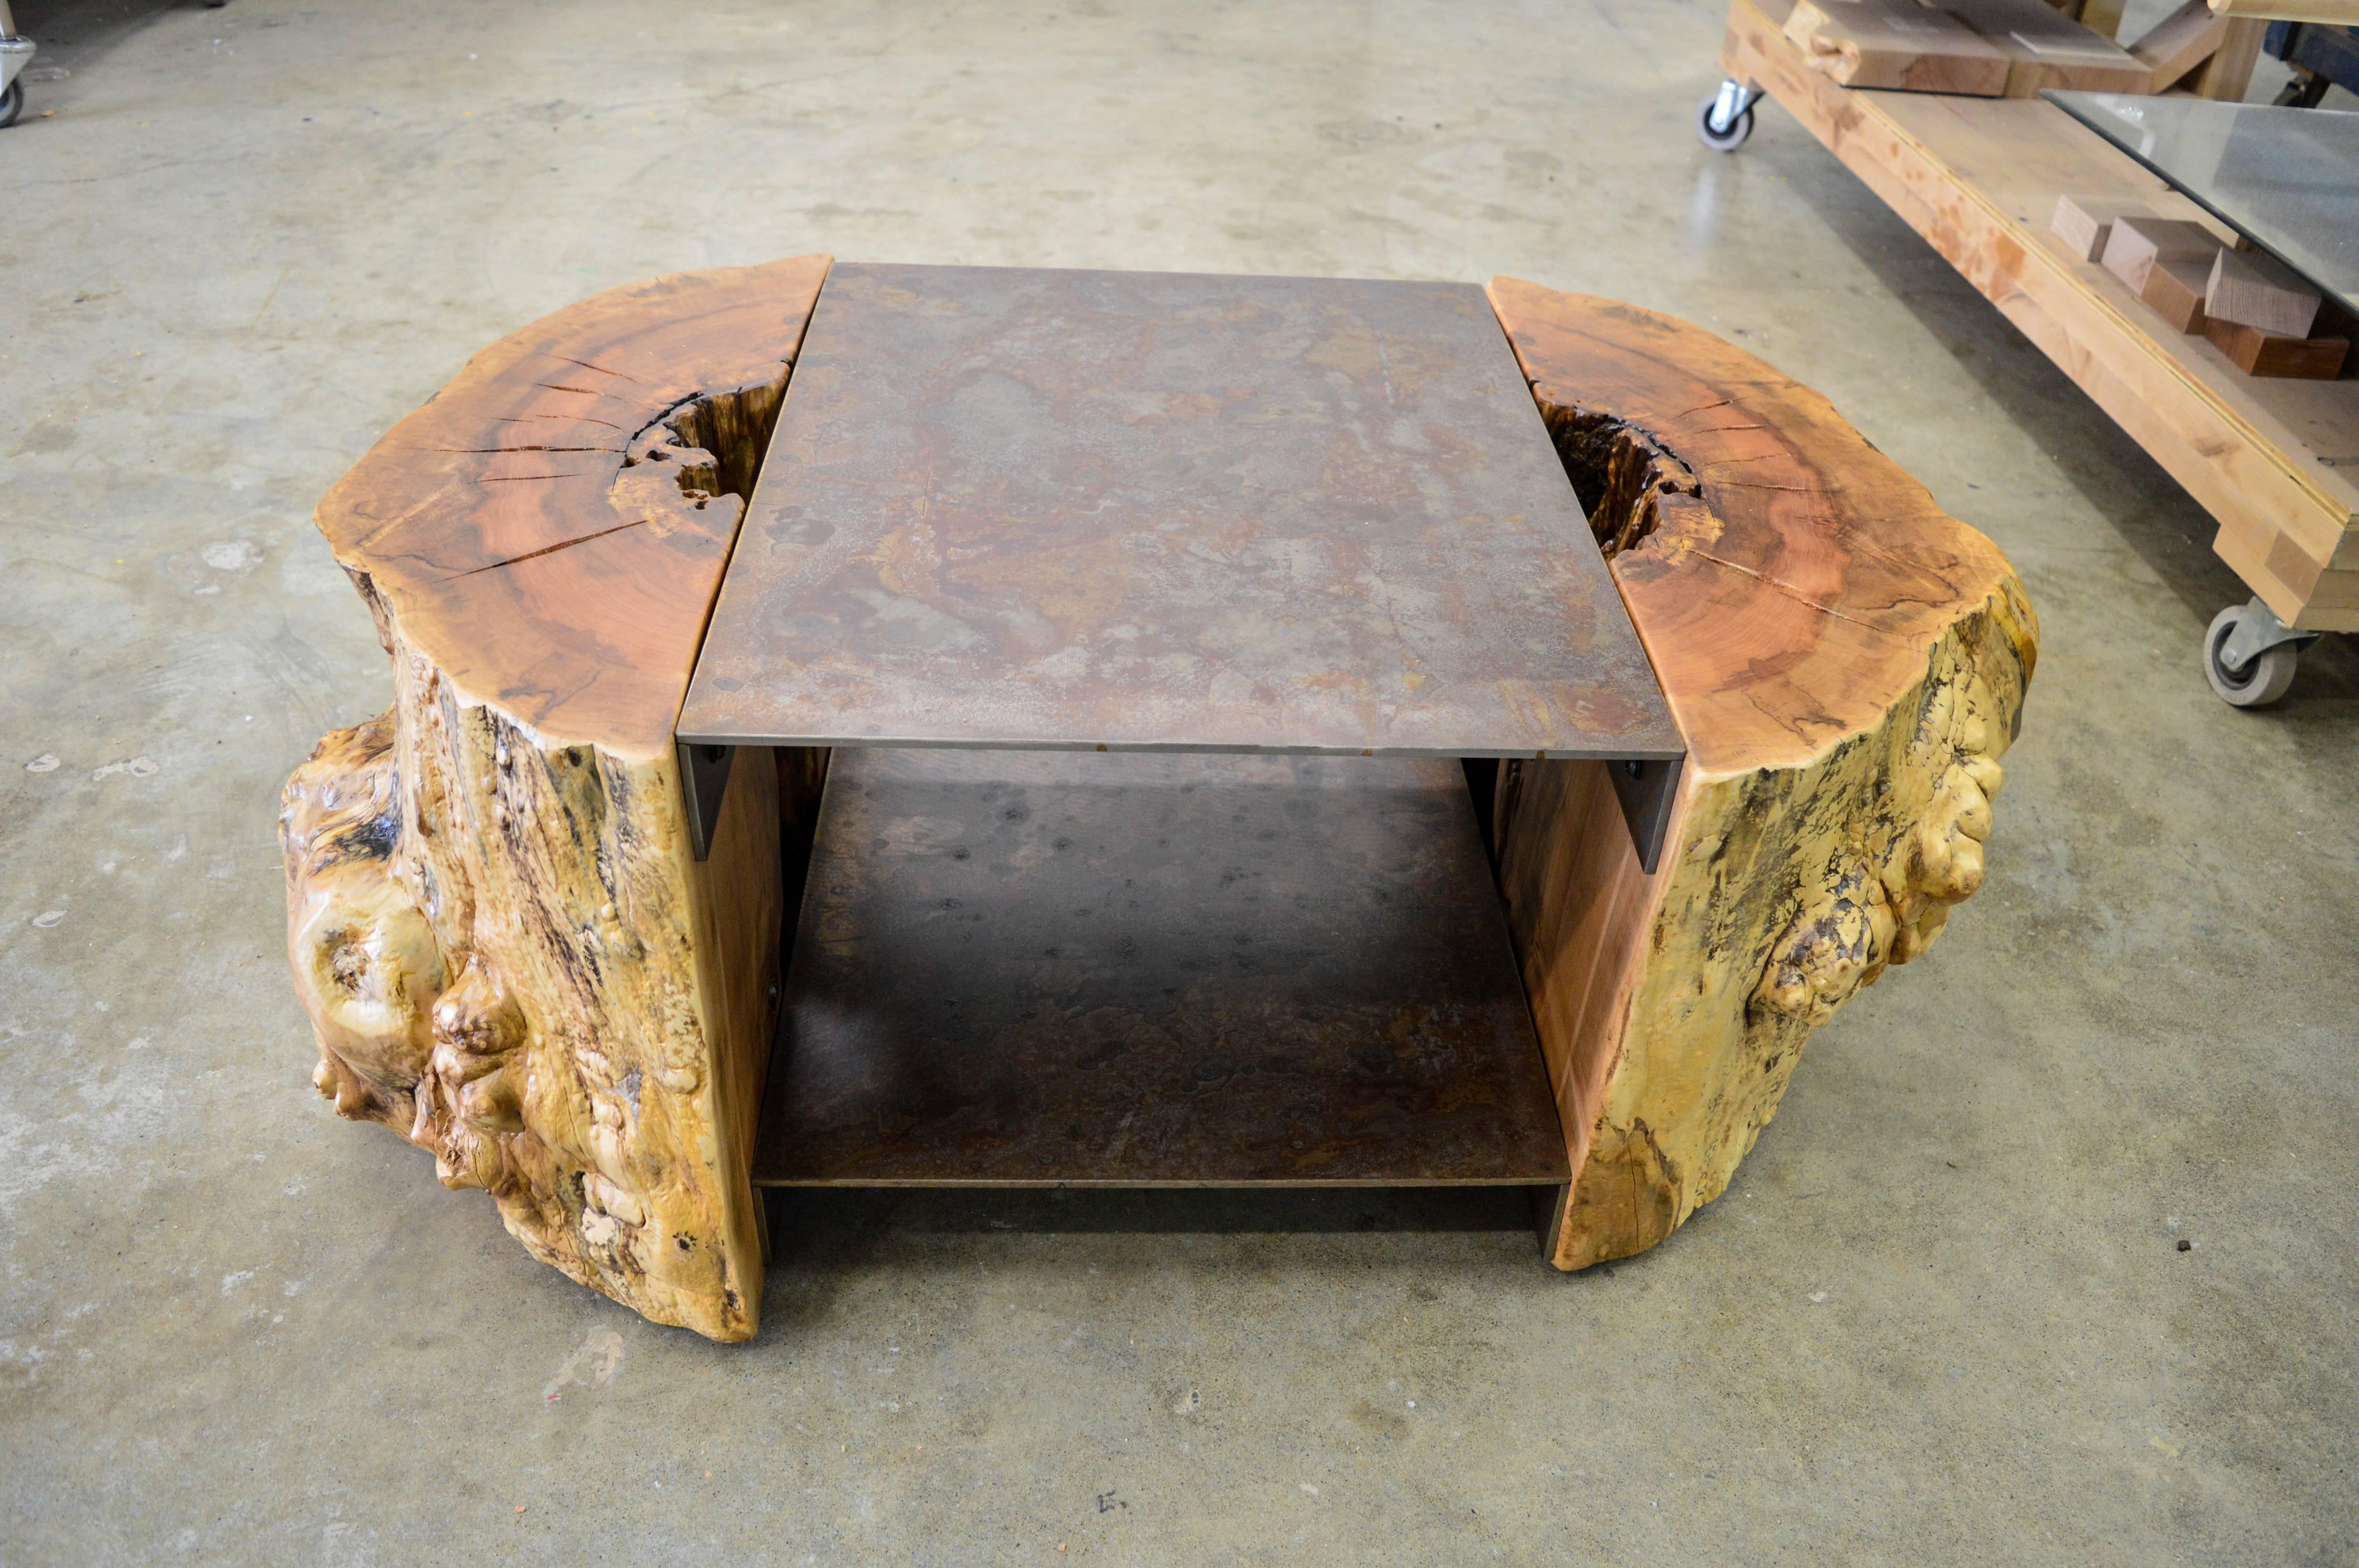 We often come across interestingly shaped chunks of maple trees that do not lend themselves to being turned into a slab but rather a stunningly unique piece of furniture. We call them 'Funky Chunks' and give them the full Live Edge treatment, often